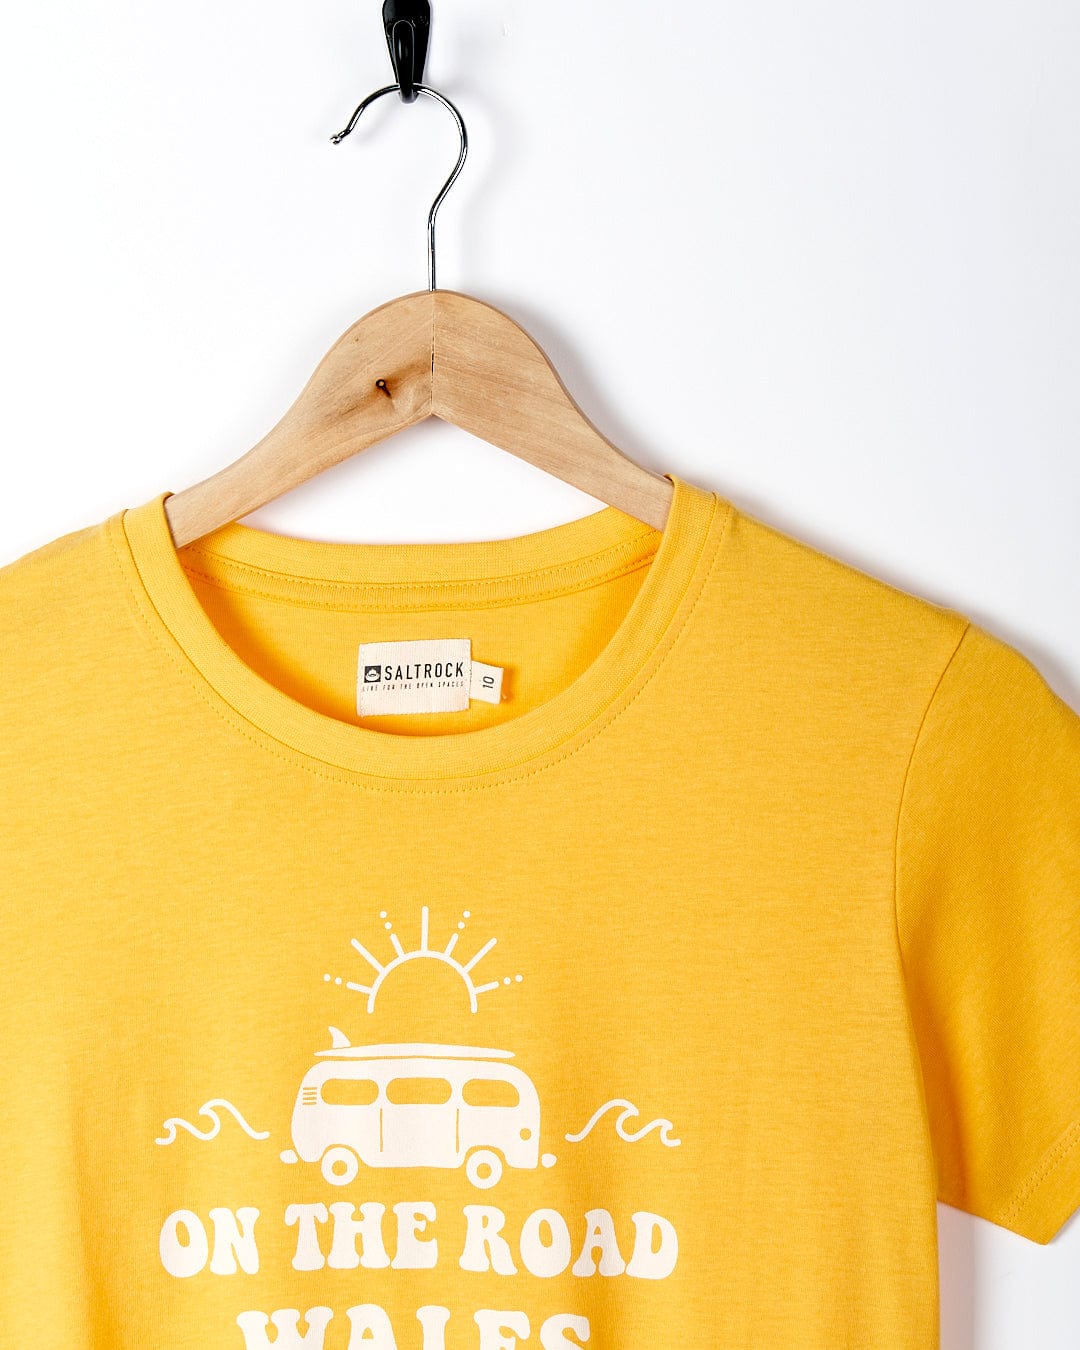 A yellow Saltrock t-shirt that says On The Road Wales.